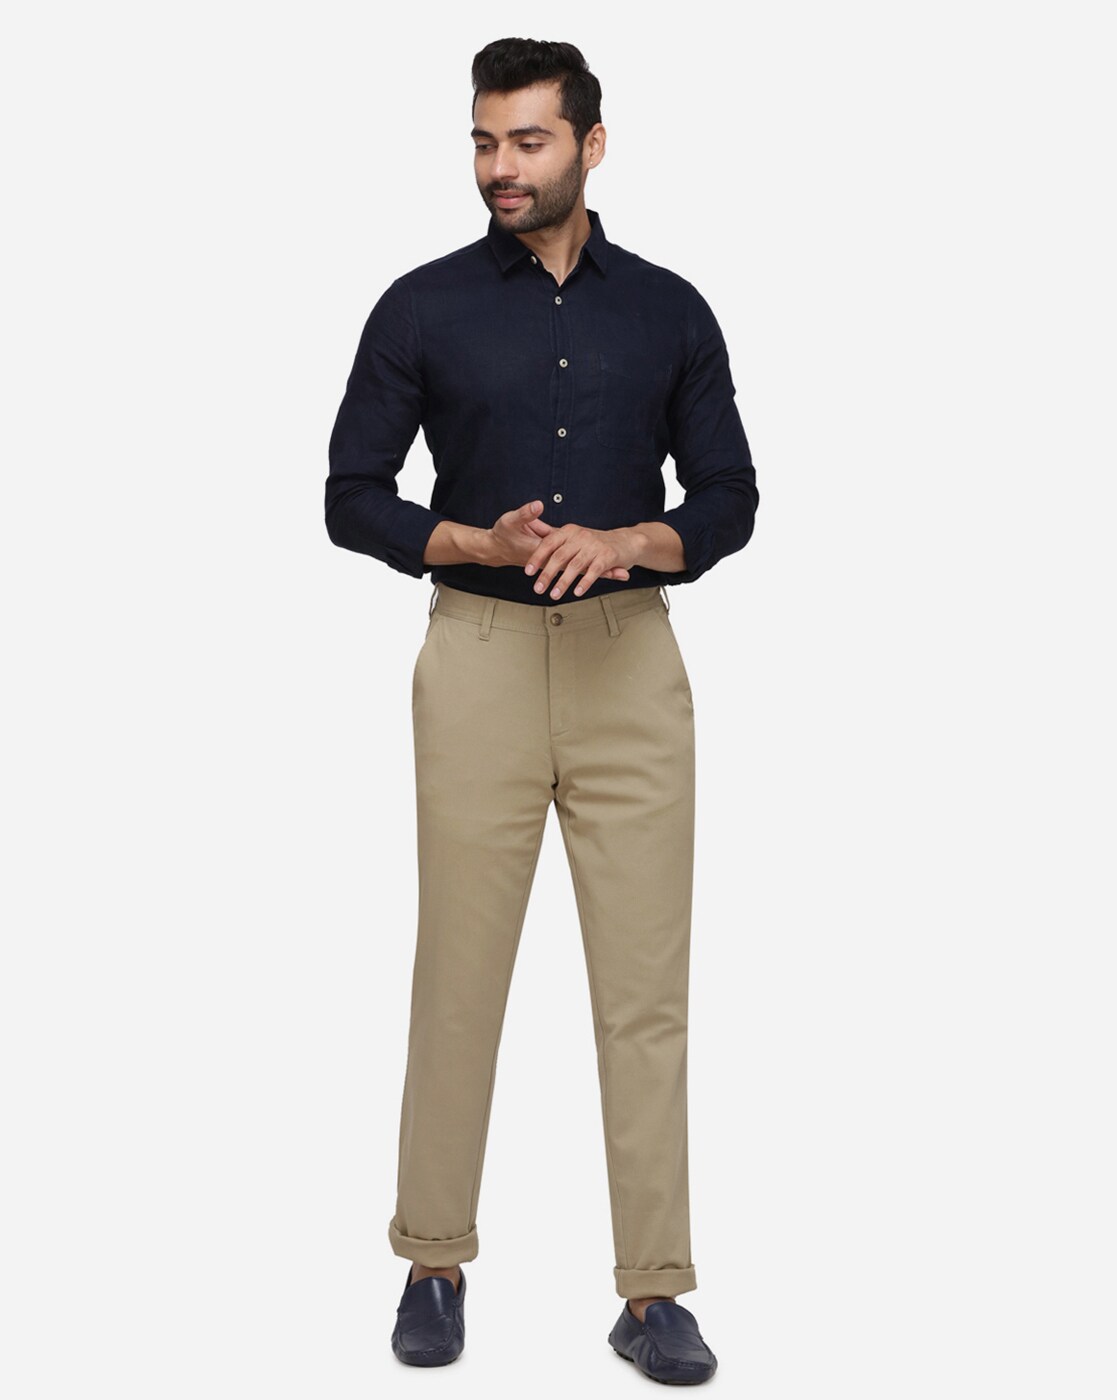 Navy blazer light khaki pants What color shirt tie and shoes would look  good  Quora